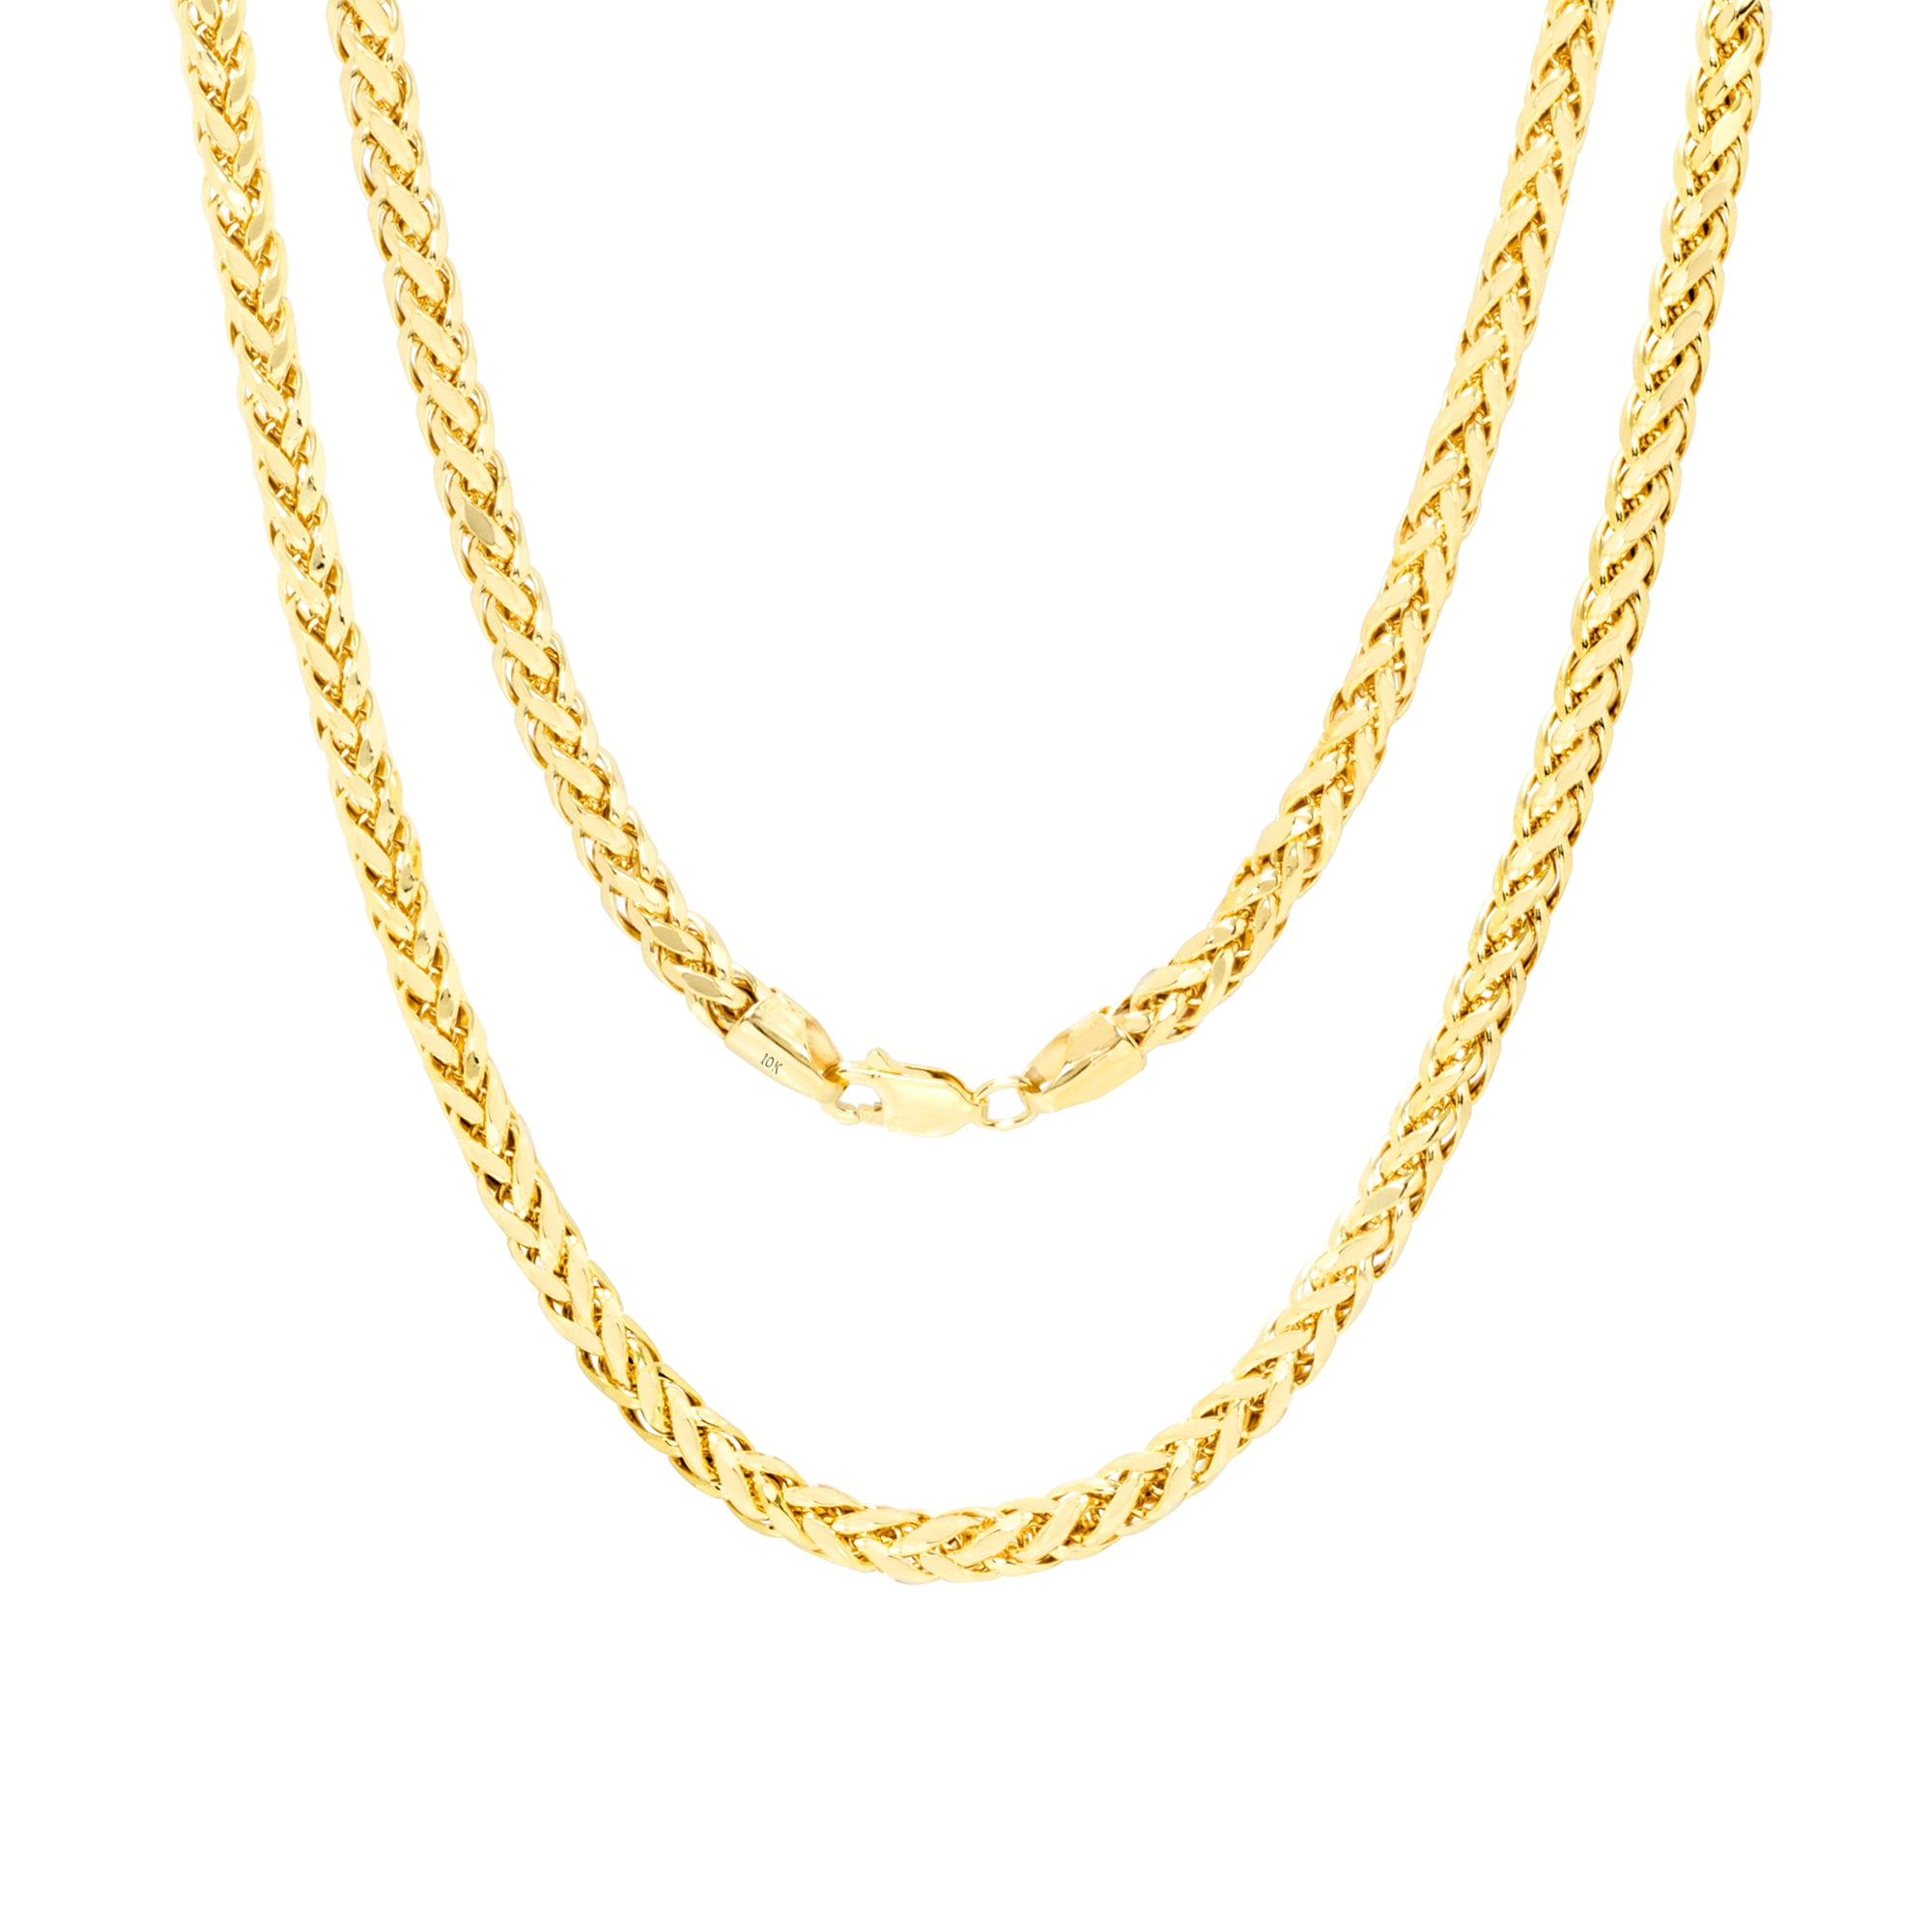 Wheat Chain Long Necklace and Oval Links - Bronzallure